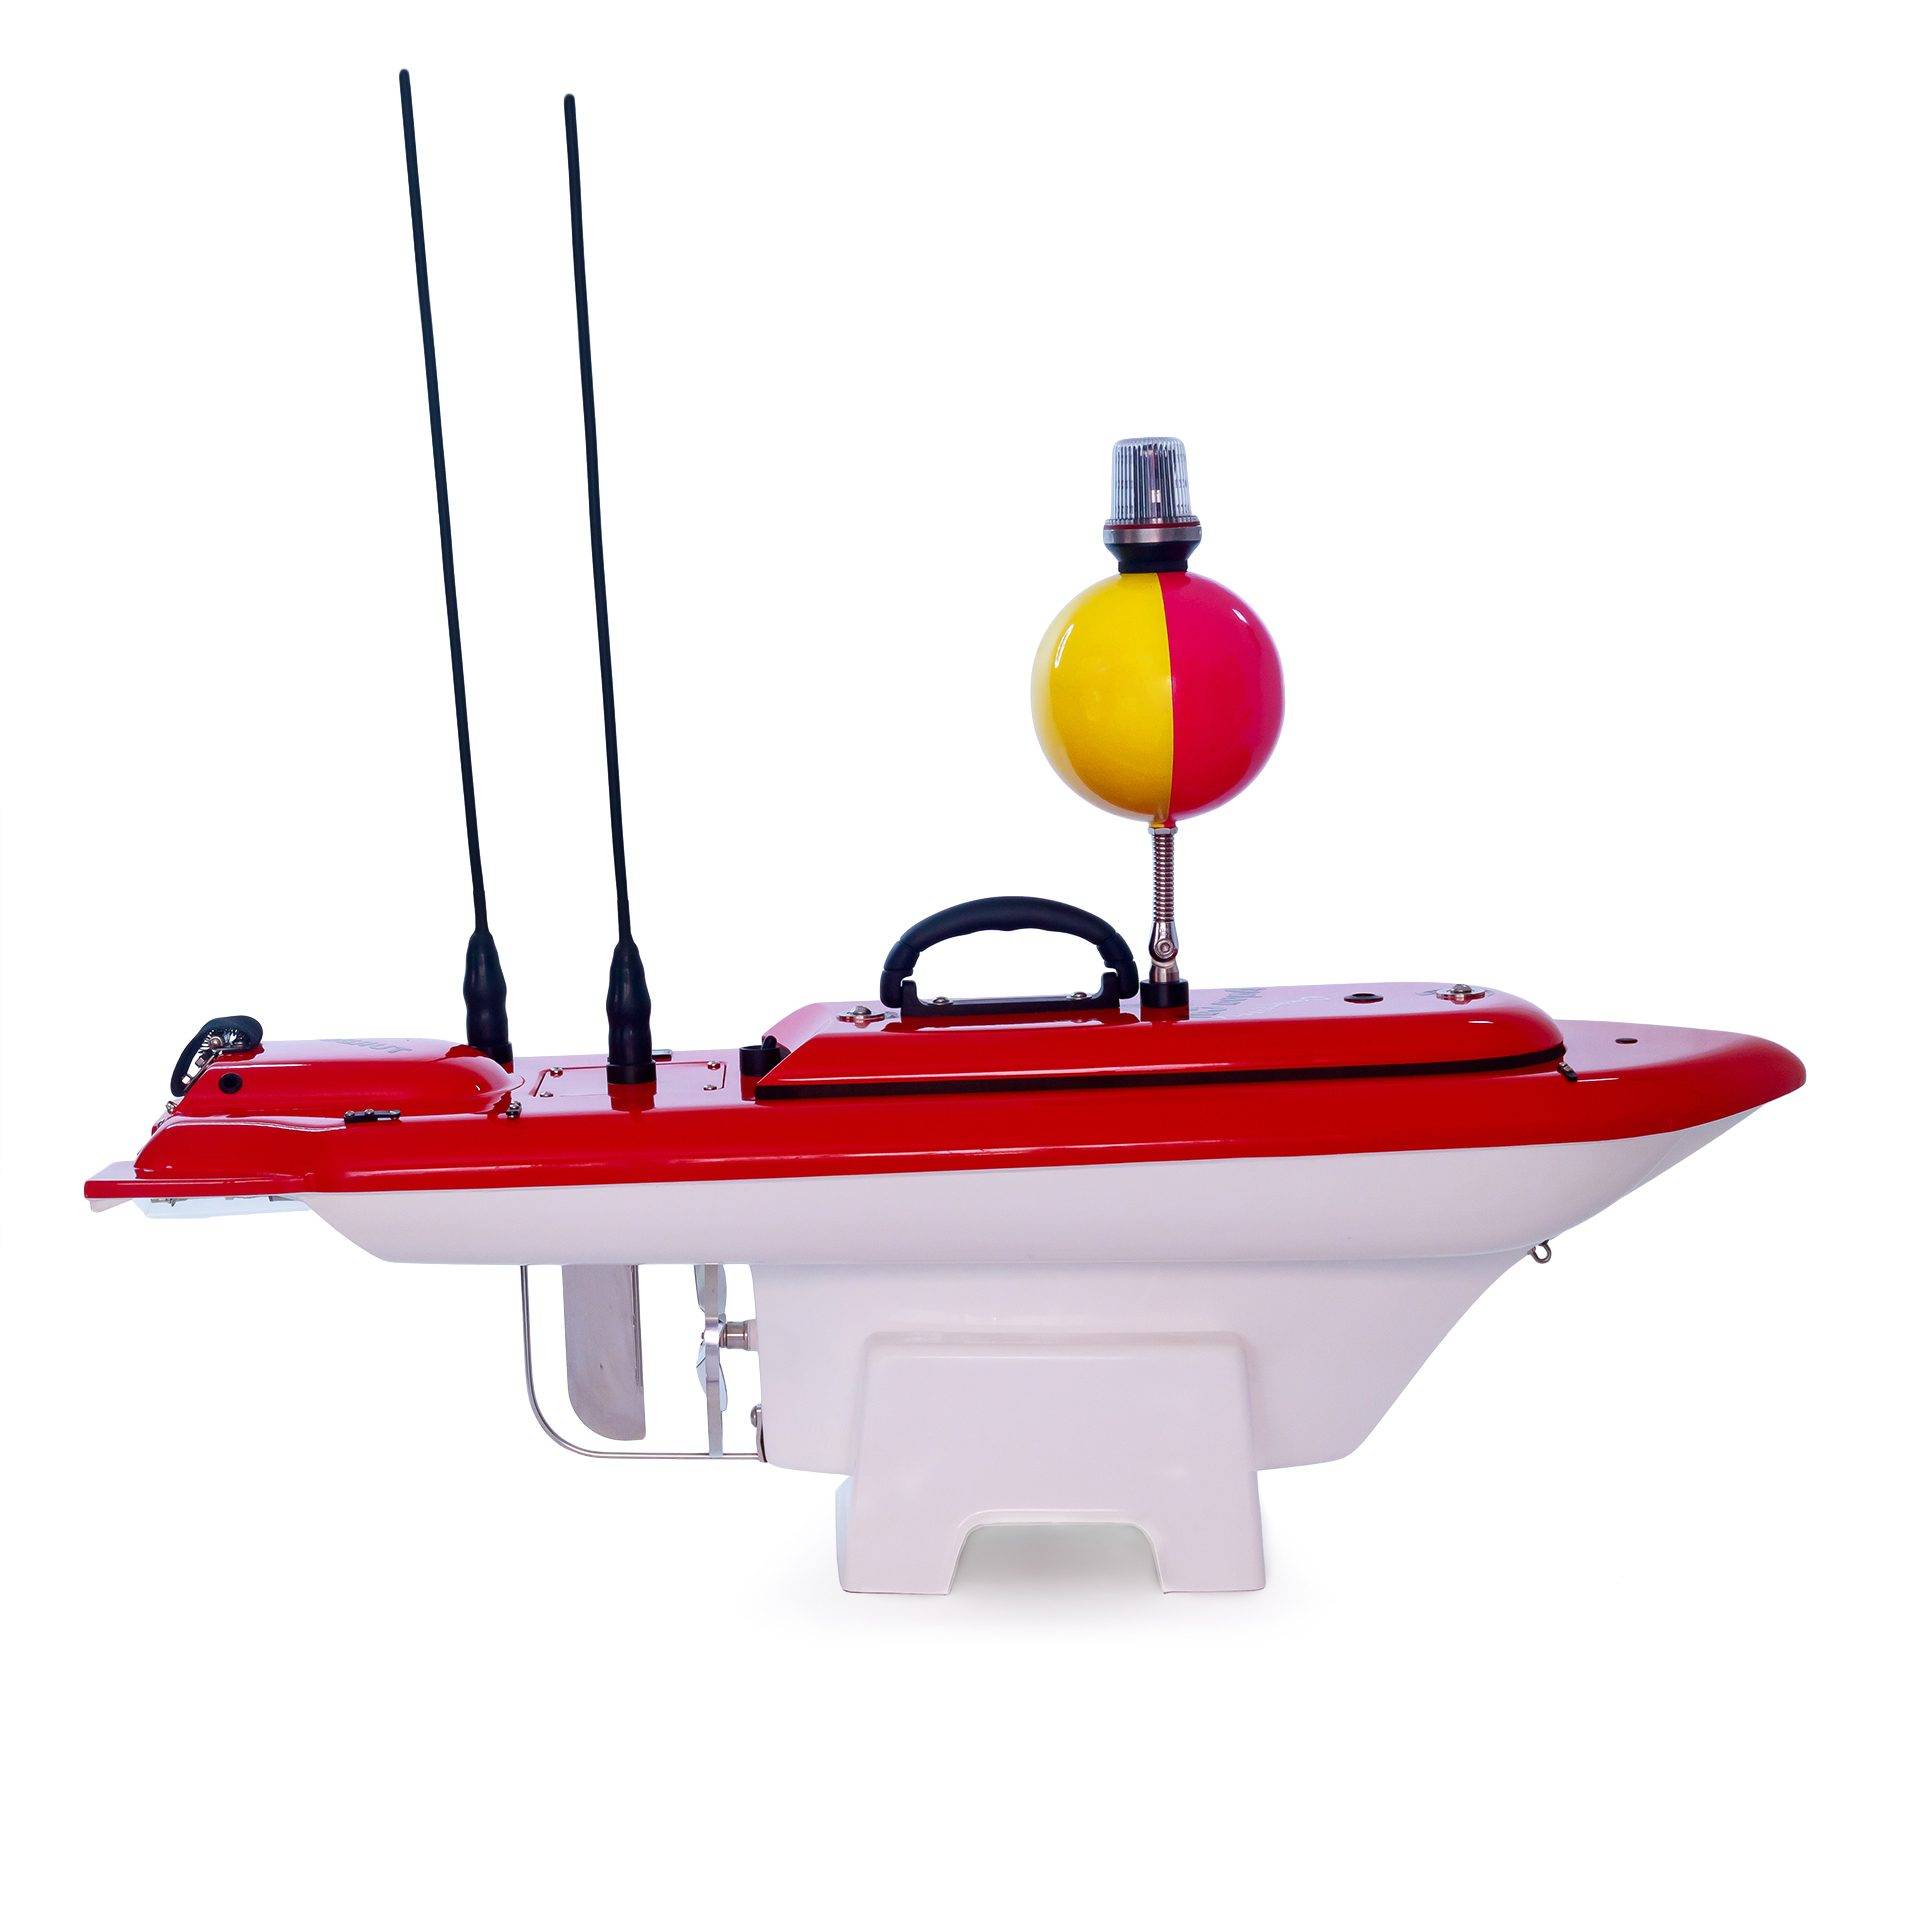 Aquacat Turbo X Fully Loaded base boat in Cherry Red